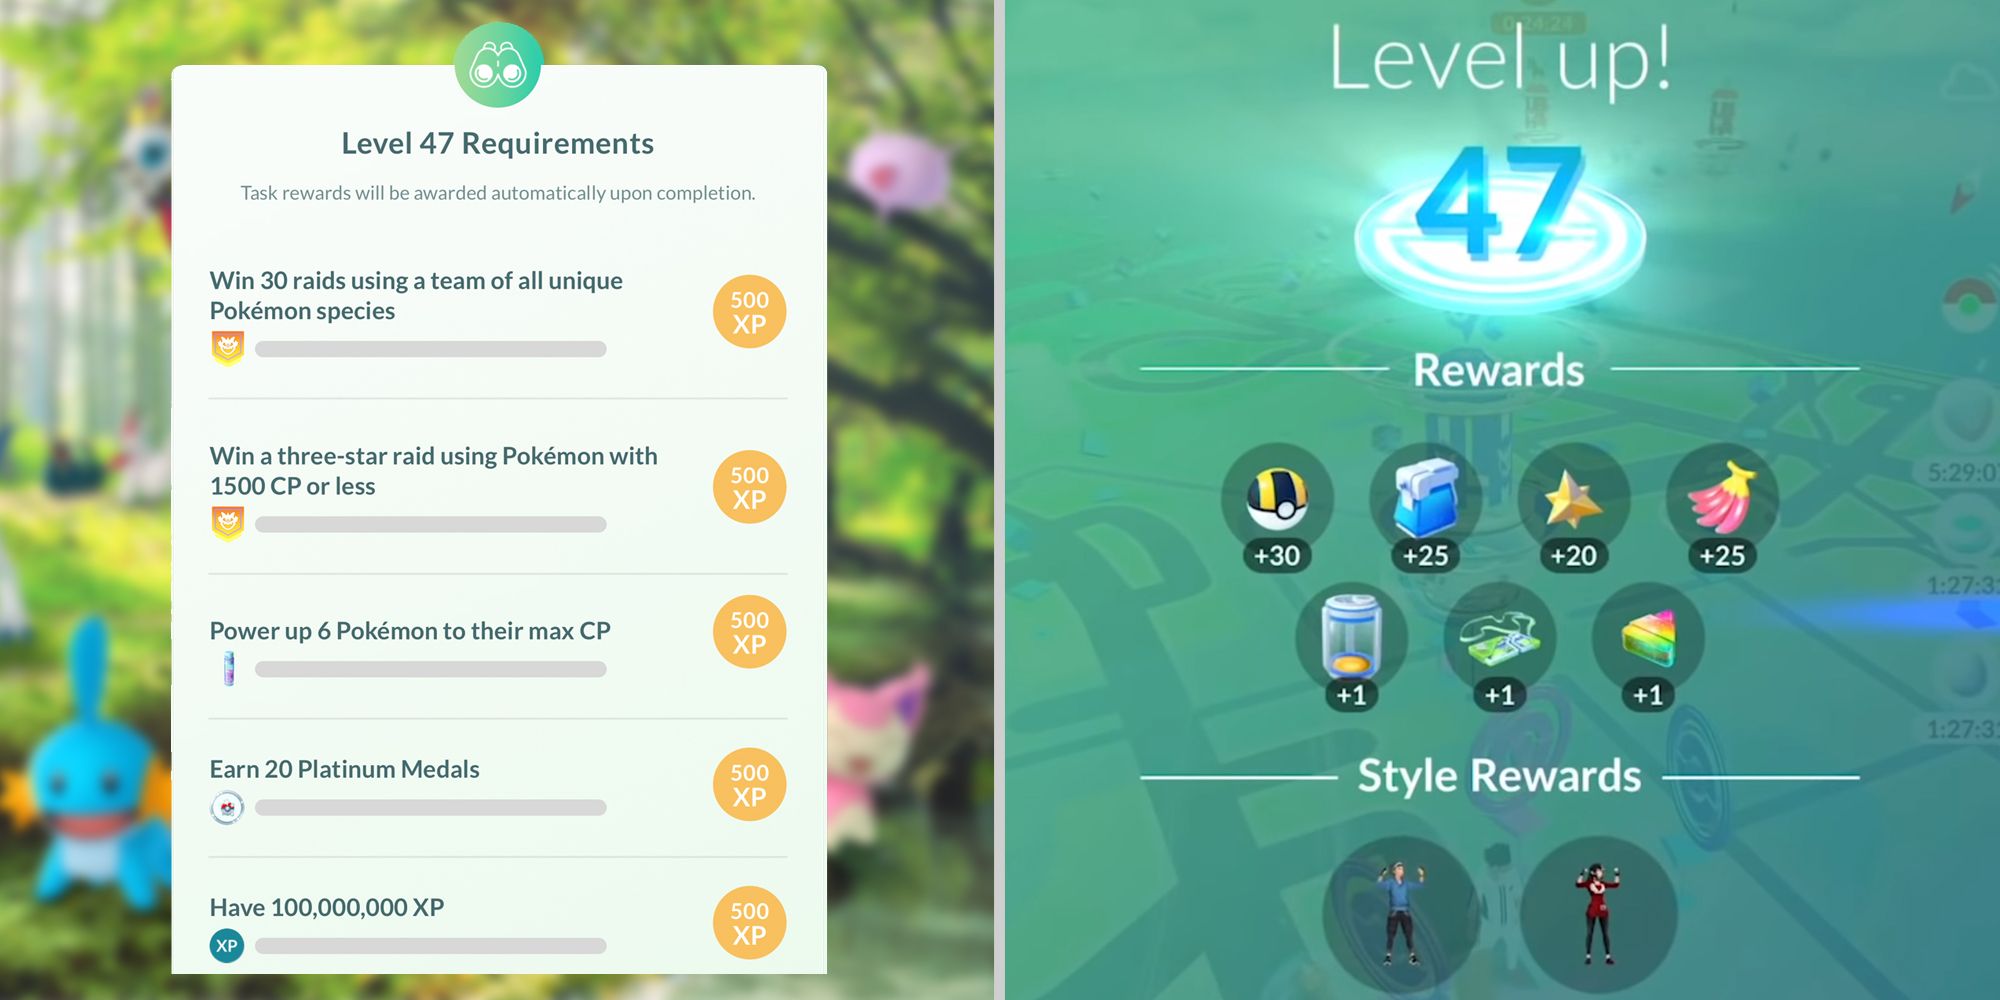 Requirements and rewards for level 47 in Pokemon Go